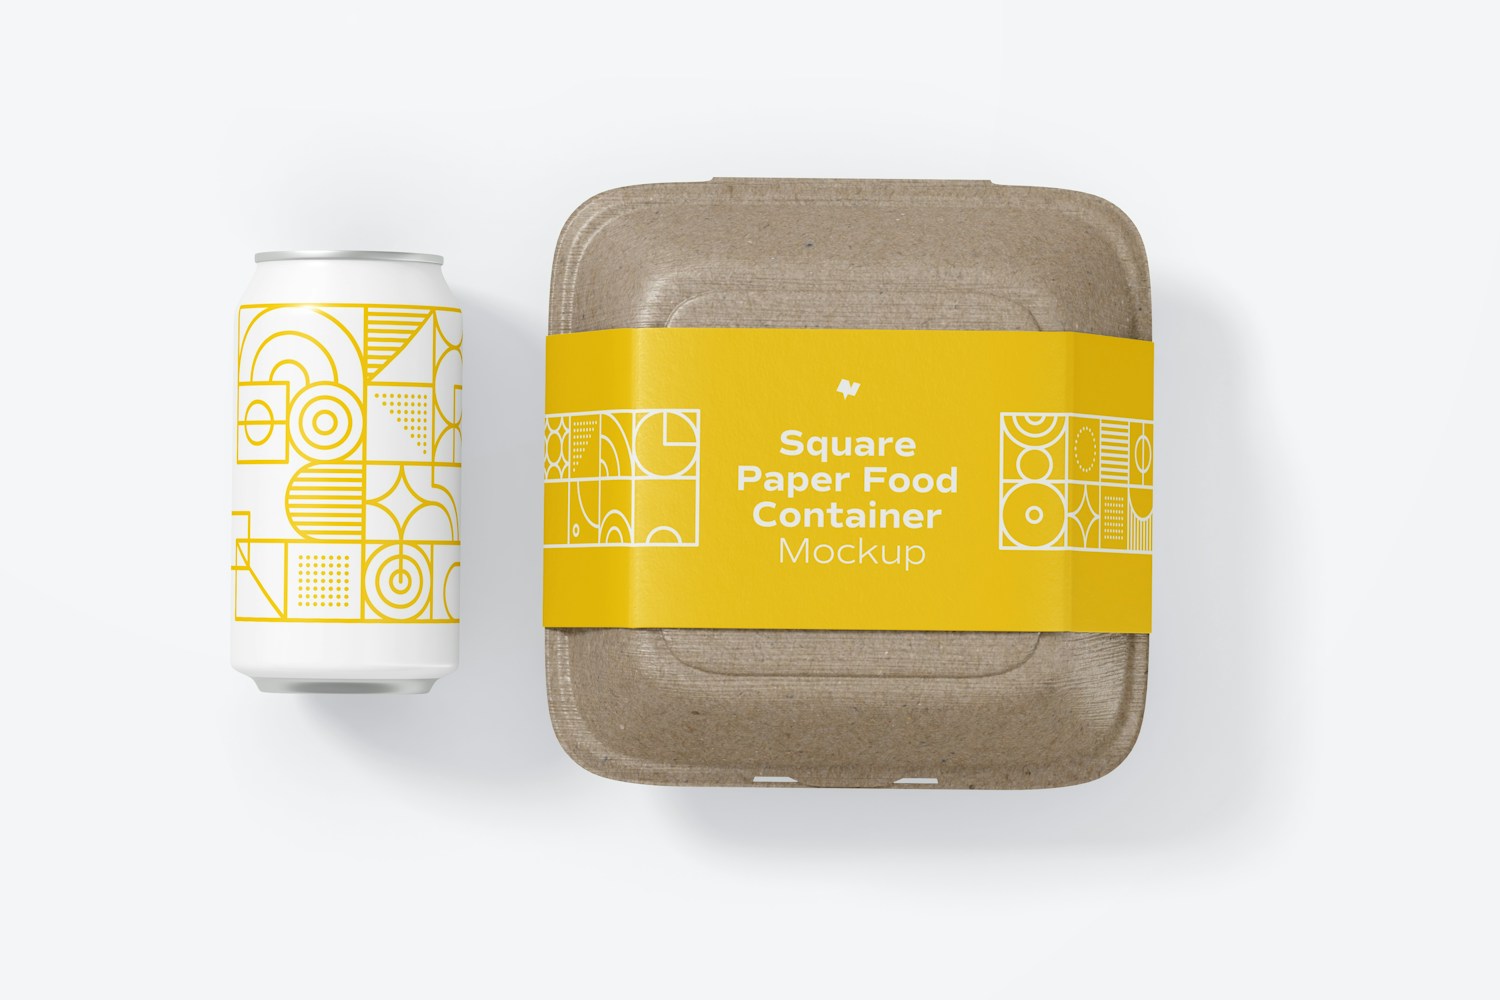 Square Paper Food Container Mockup with Can, Horizontal